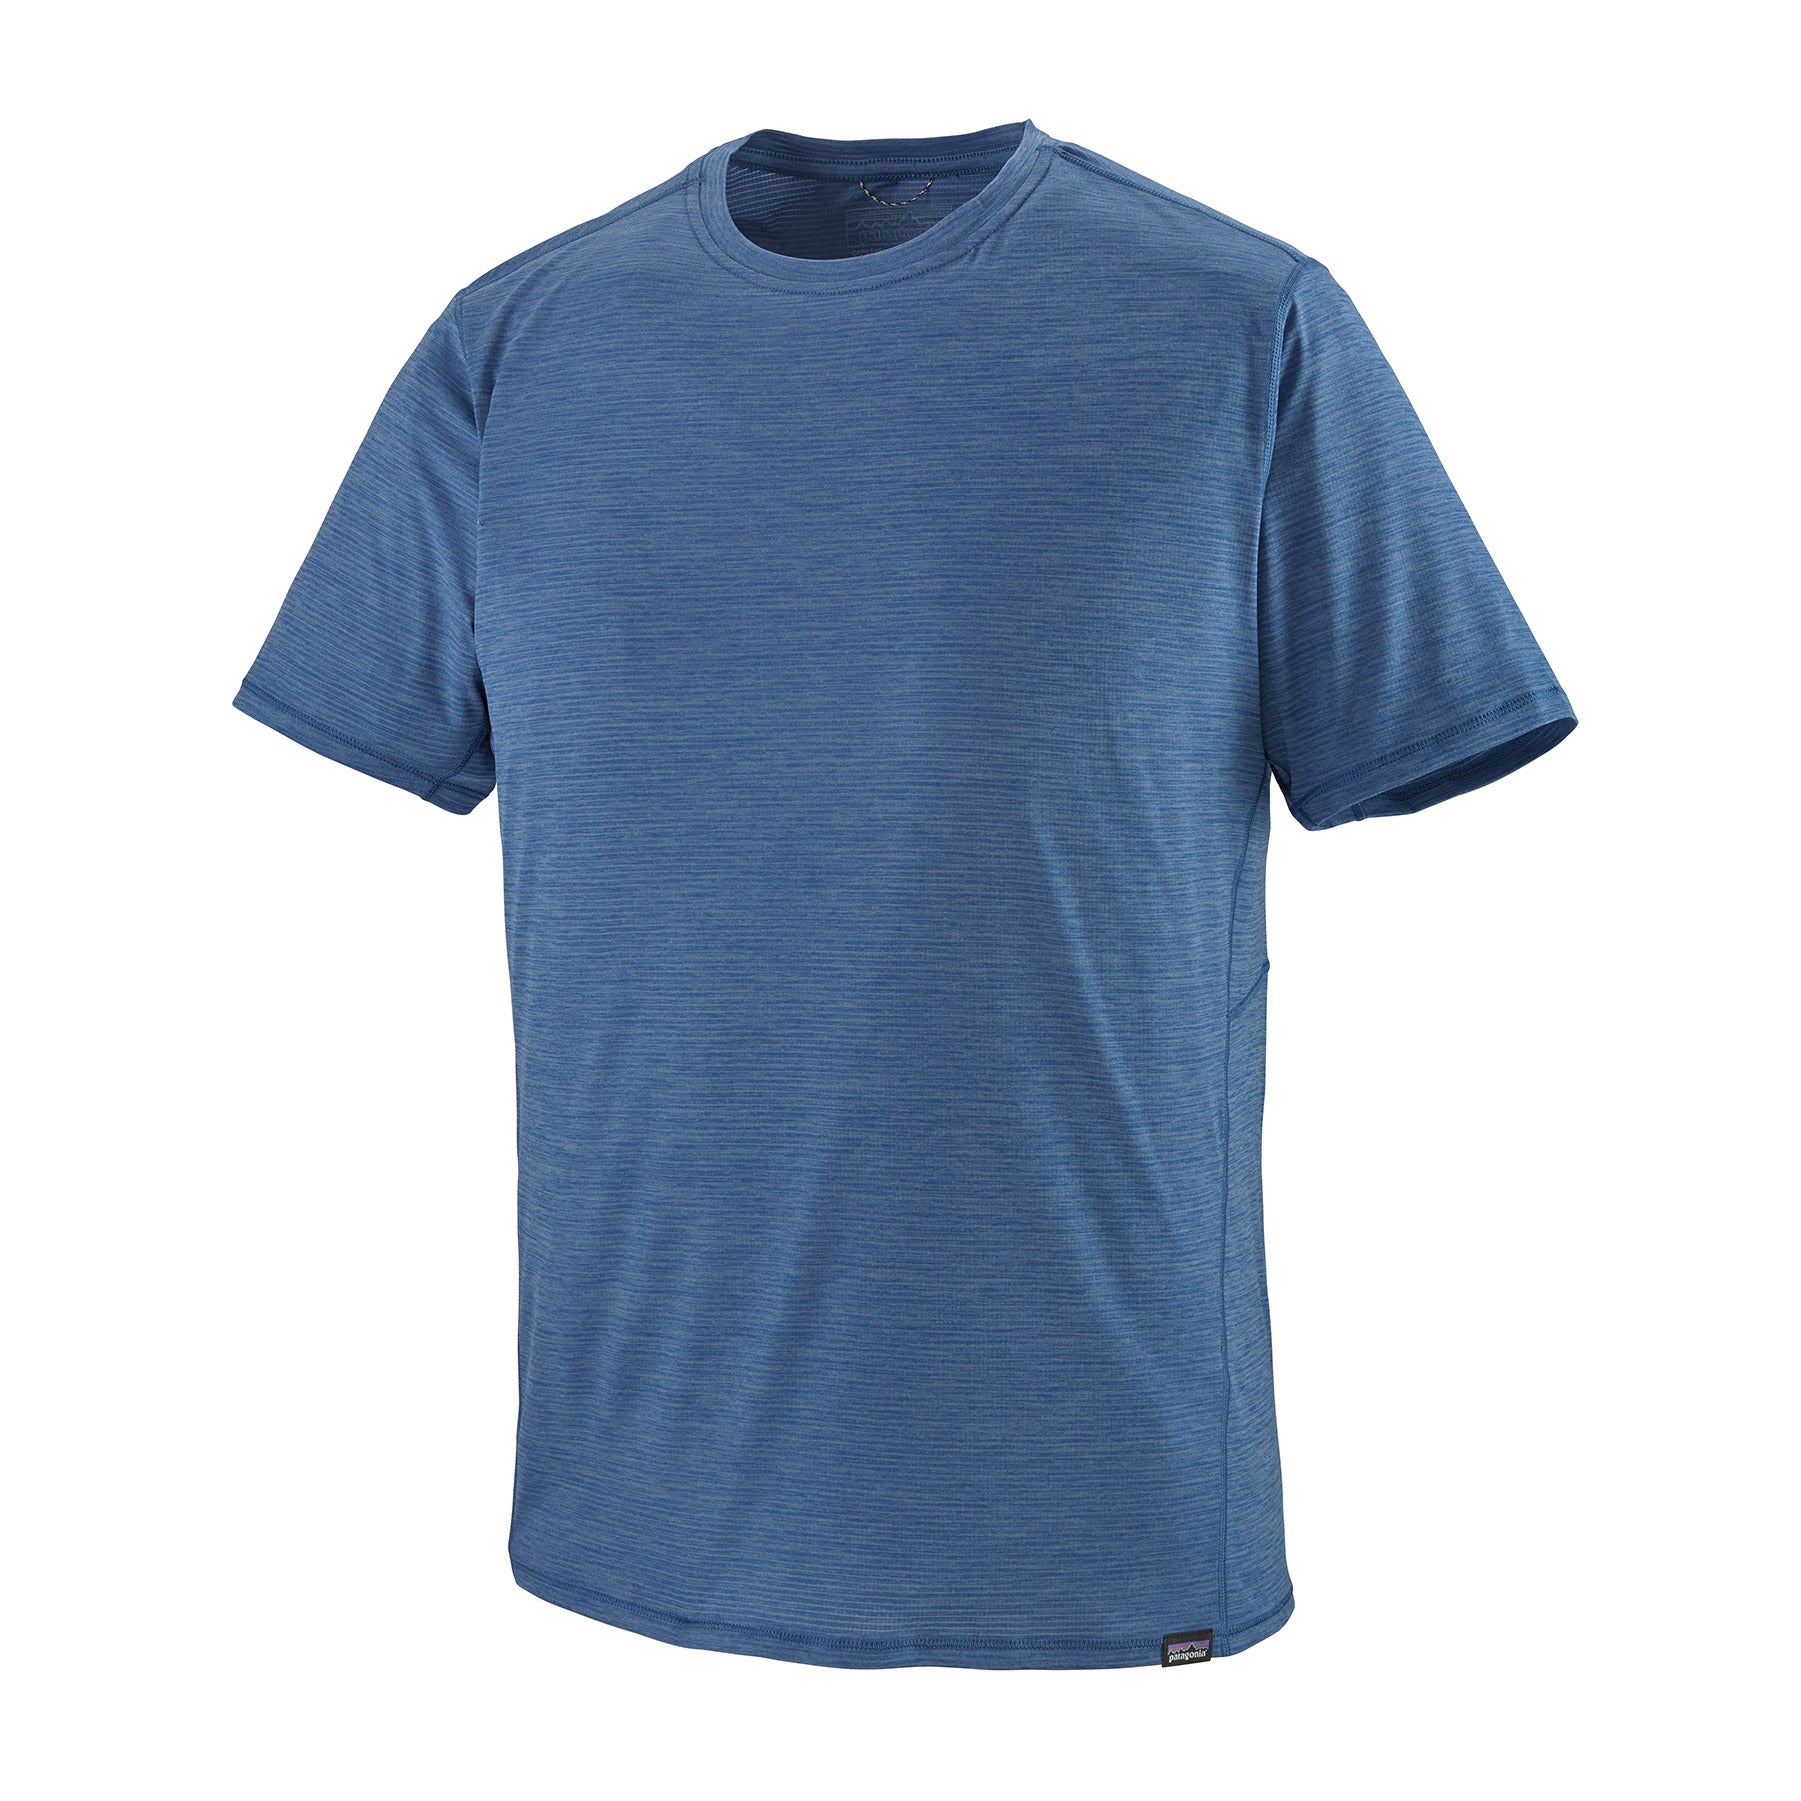 patagonia mens short sleeve capilene cool lightweight shirt in superior blue light superior blue x dye, front view